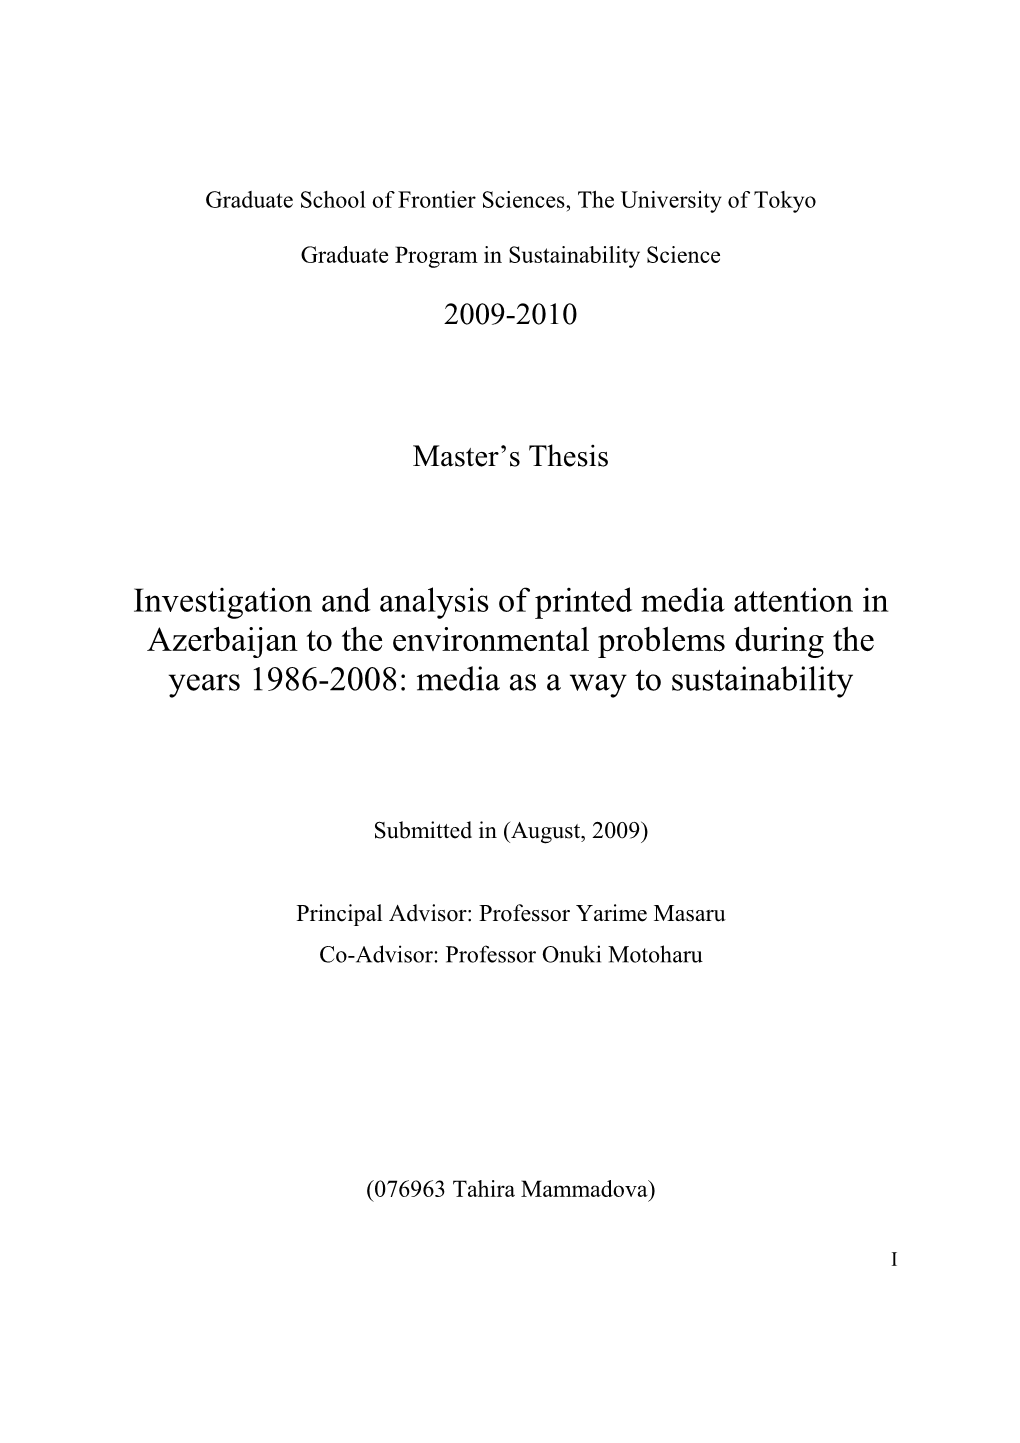 Investigation and Analysis of Printed Media Attention in Azerbaijan to the Environmental Problems During the Years 1986-2008: Media As a Way to Sustainability